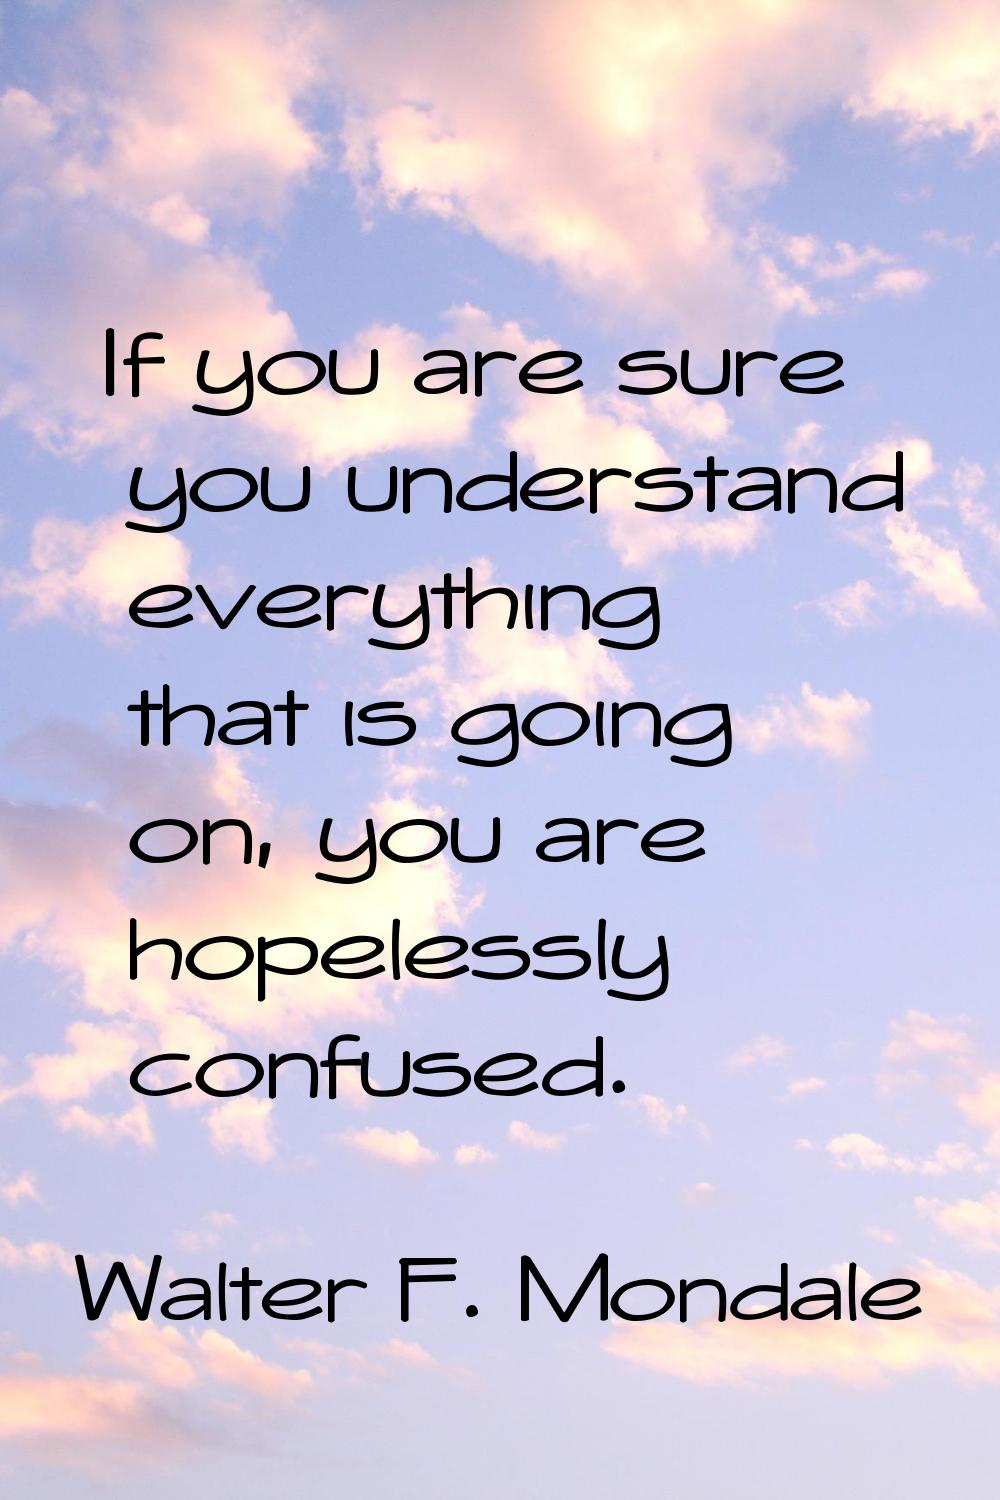 If you are sure you understand everything that is going on, you are hopelessly confused.